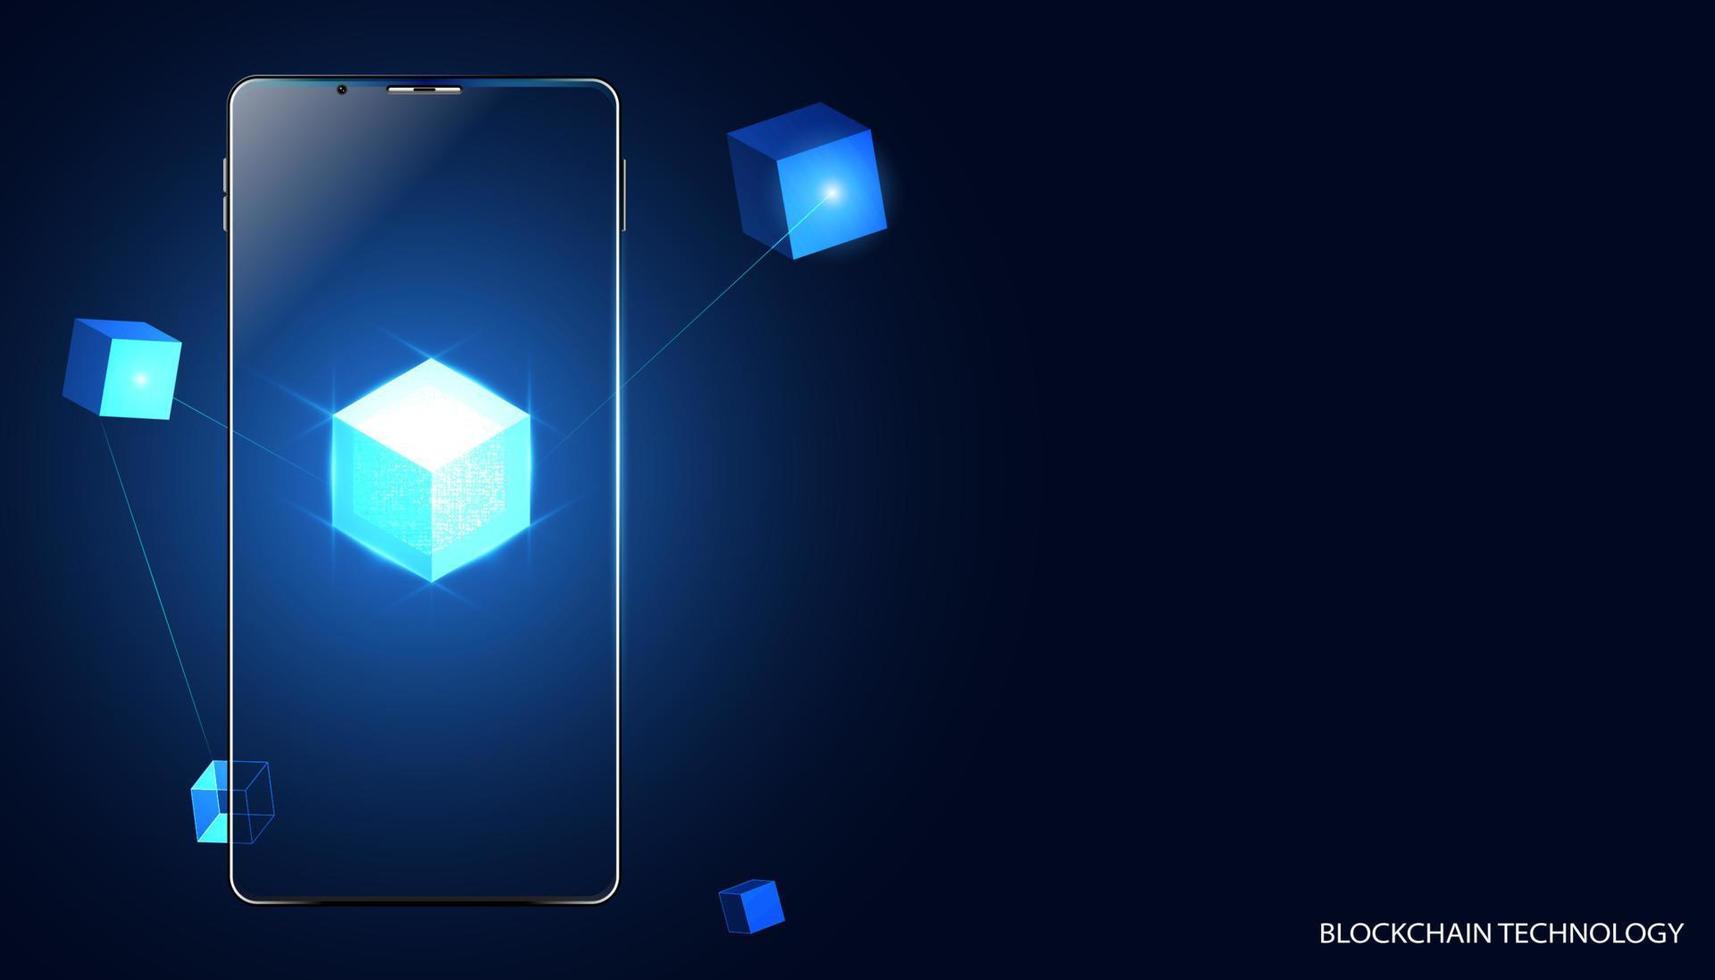 Abstract blockchain technology cryptocurrency and fintech square cube  and phone crypto operations Connect block, data transmission, new technology system, Vector illustration.